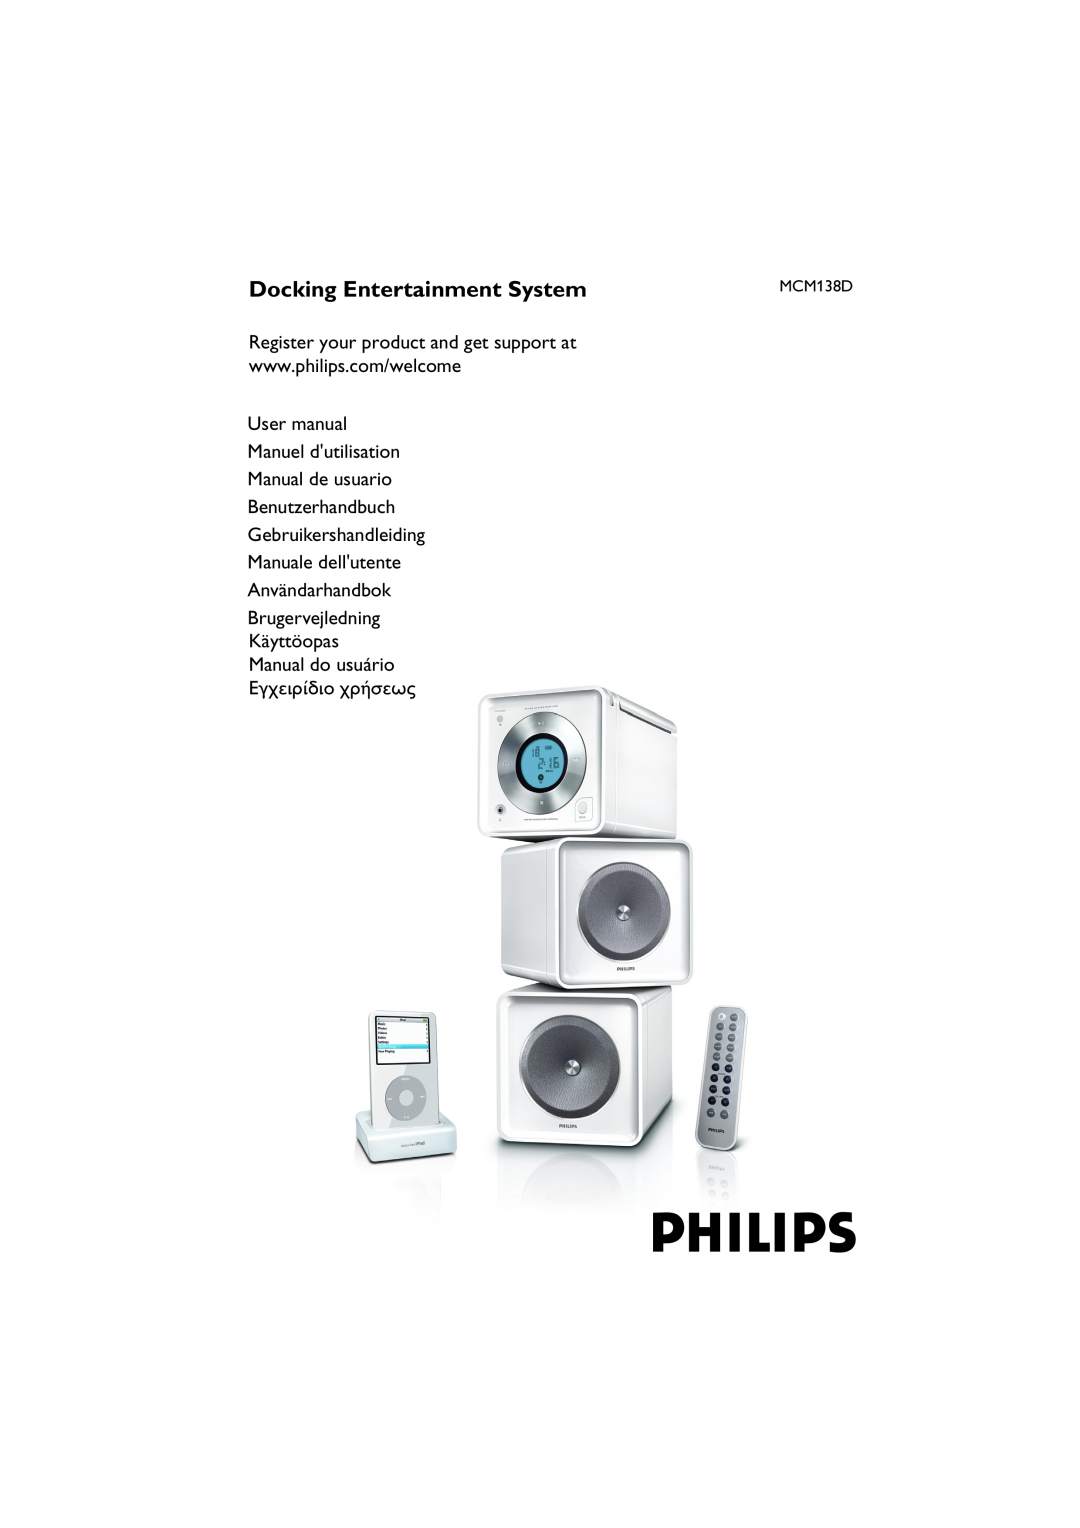 Philips MCM138D user manual Docking Entertainment System, Register your product and get support at 